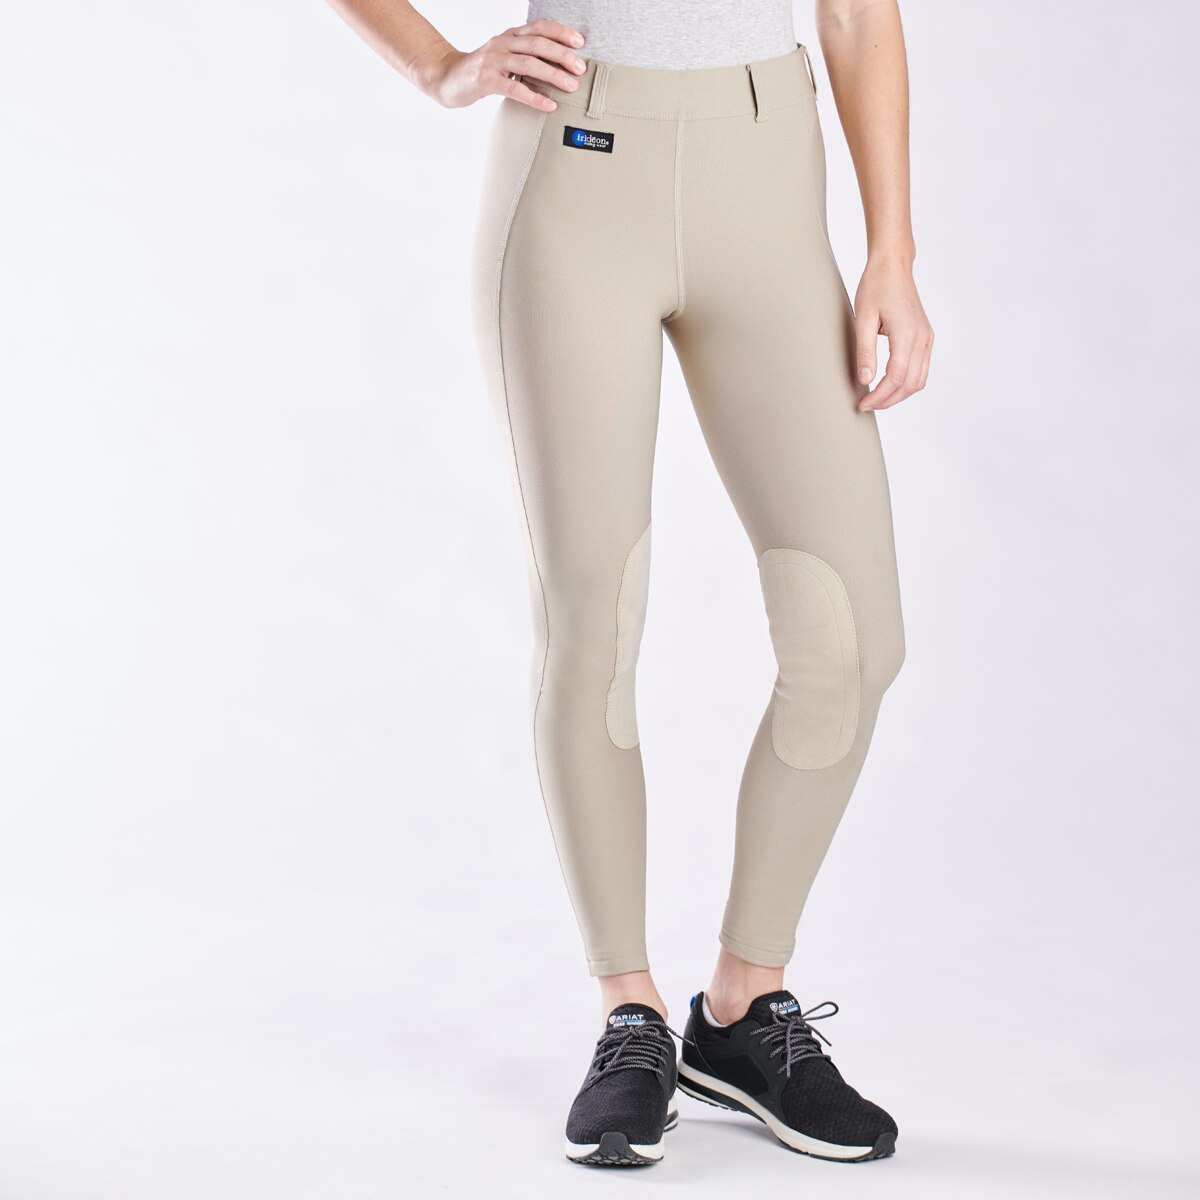 C-L-CM LARGE IRIDEON HIGHLIGHTING POCKETS HORSE RIDING ISSENTIAL CARGO TIGHTS CH